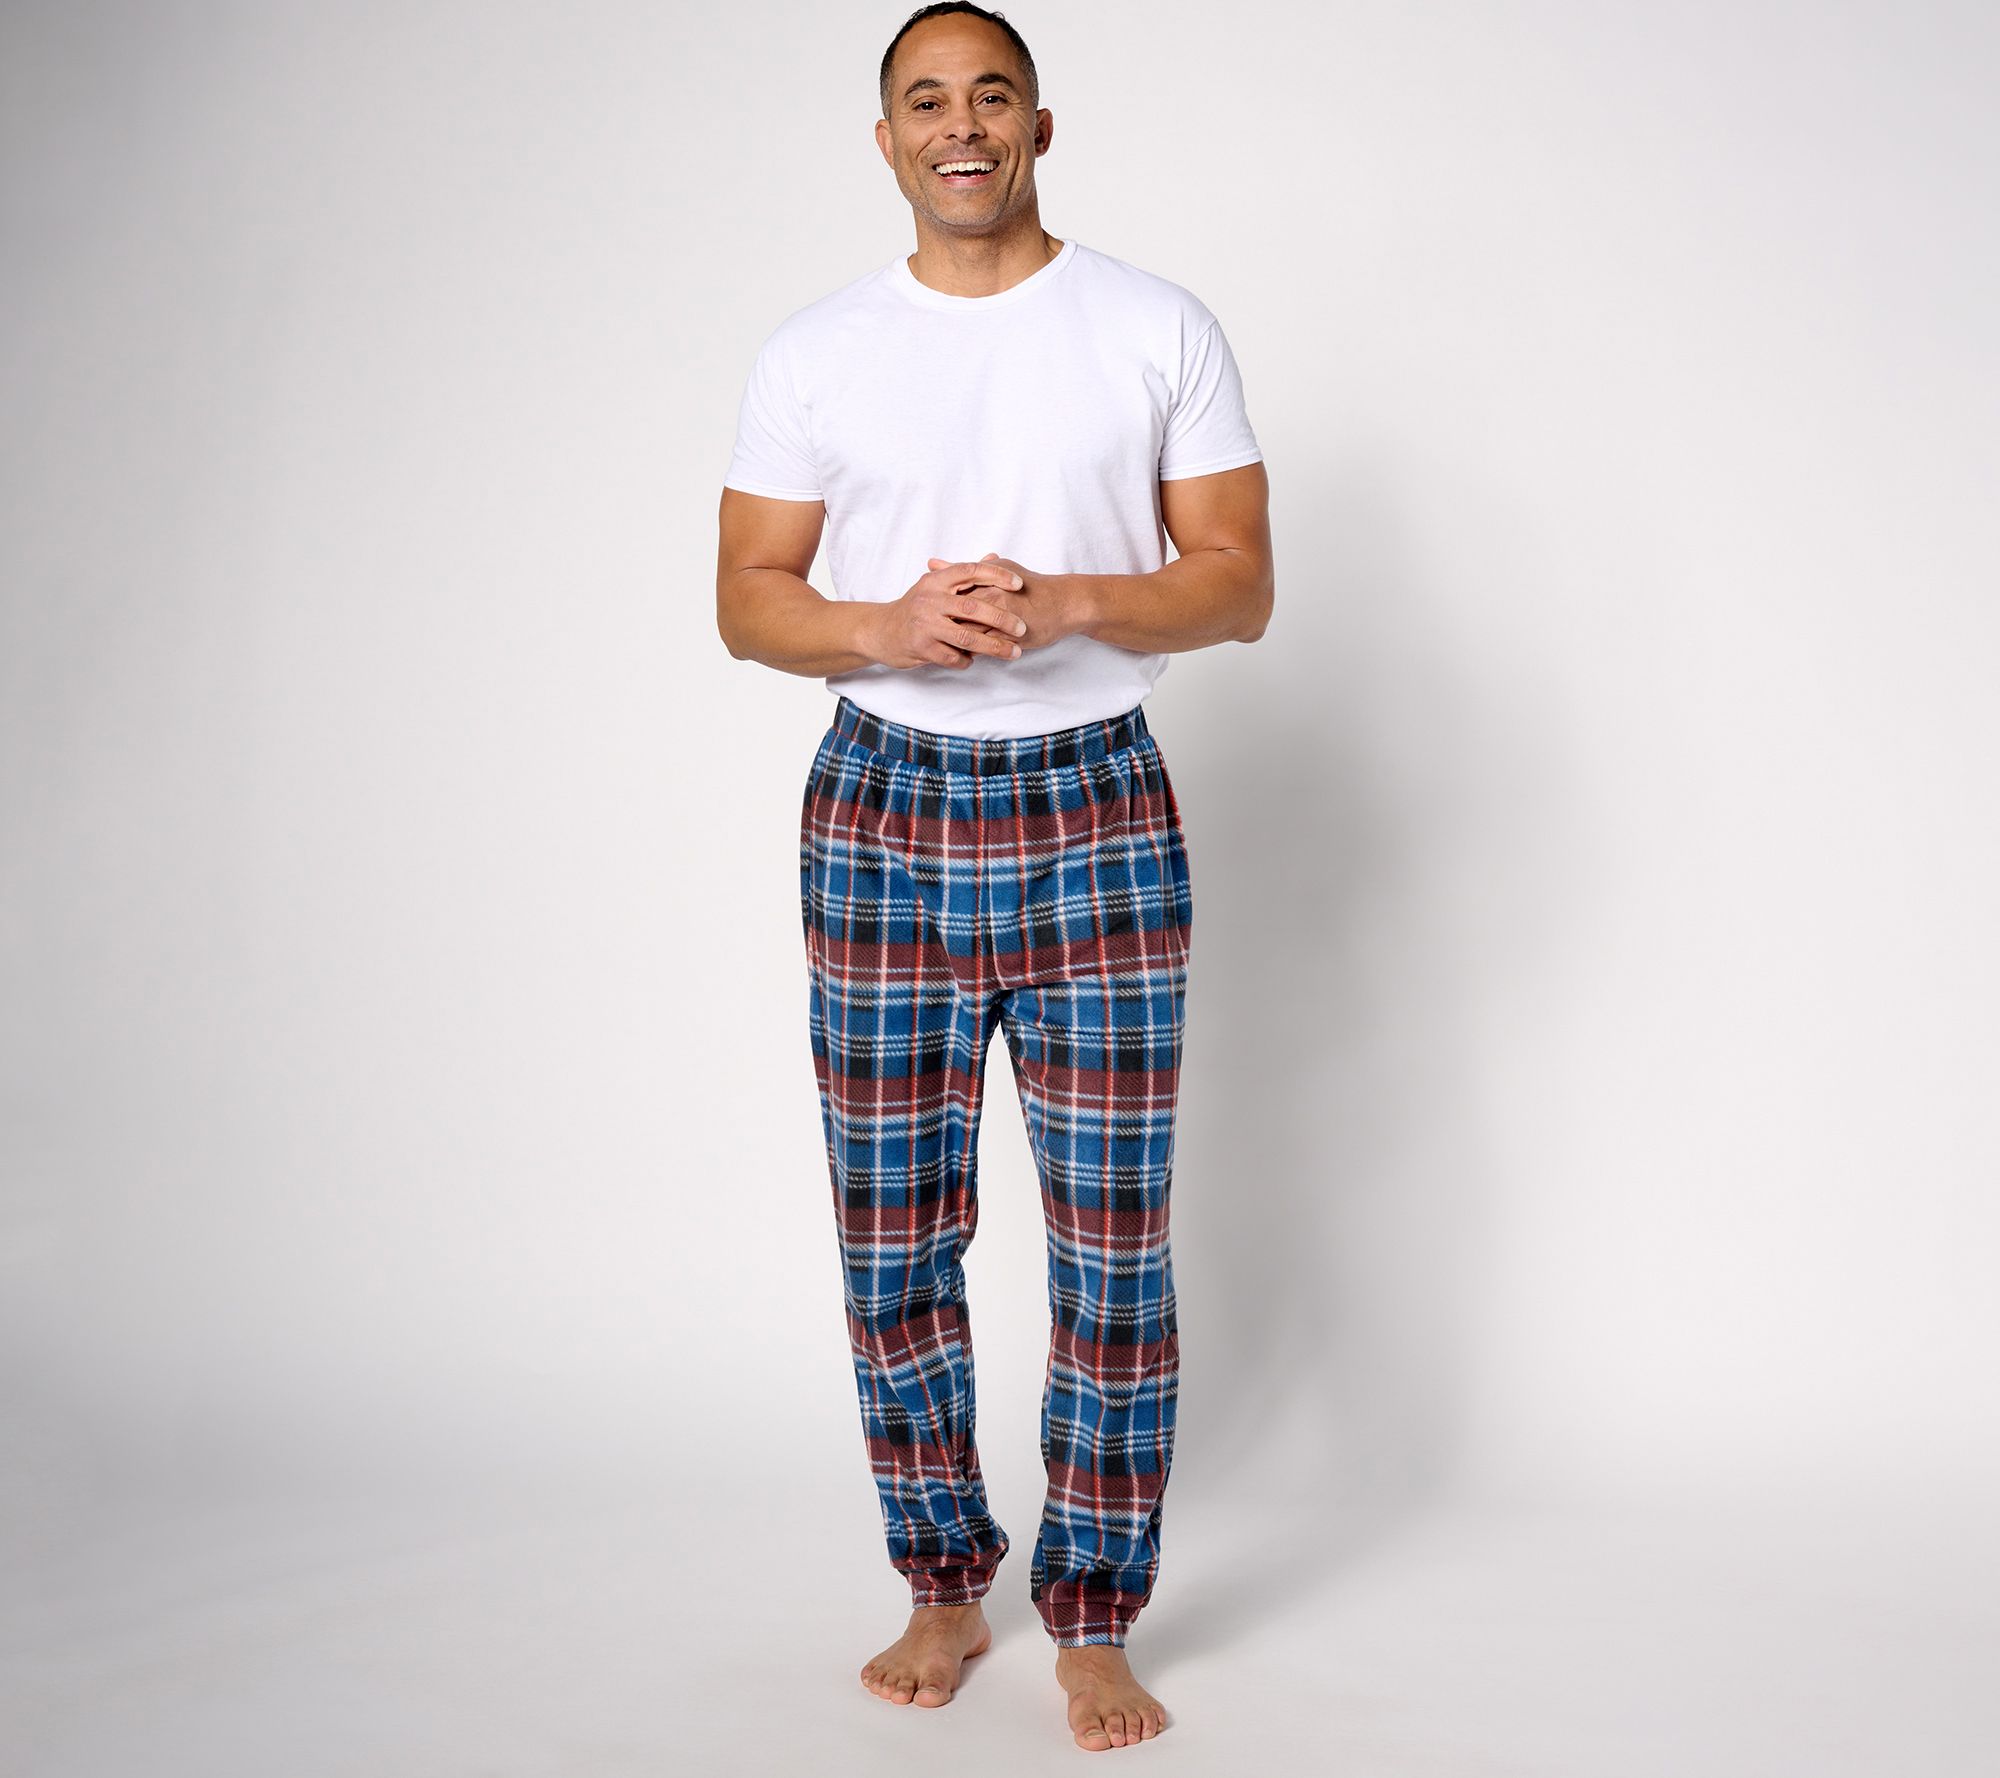 New Style Hot Sale Cotton Plaid Pajama Pants For Adluts Home Furnishing  Cotton Trousers Cotton Pajama Men Sleep Bottom Home Wear